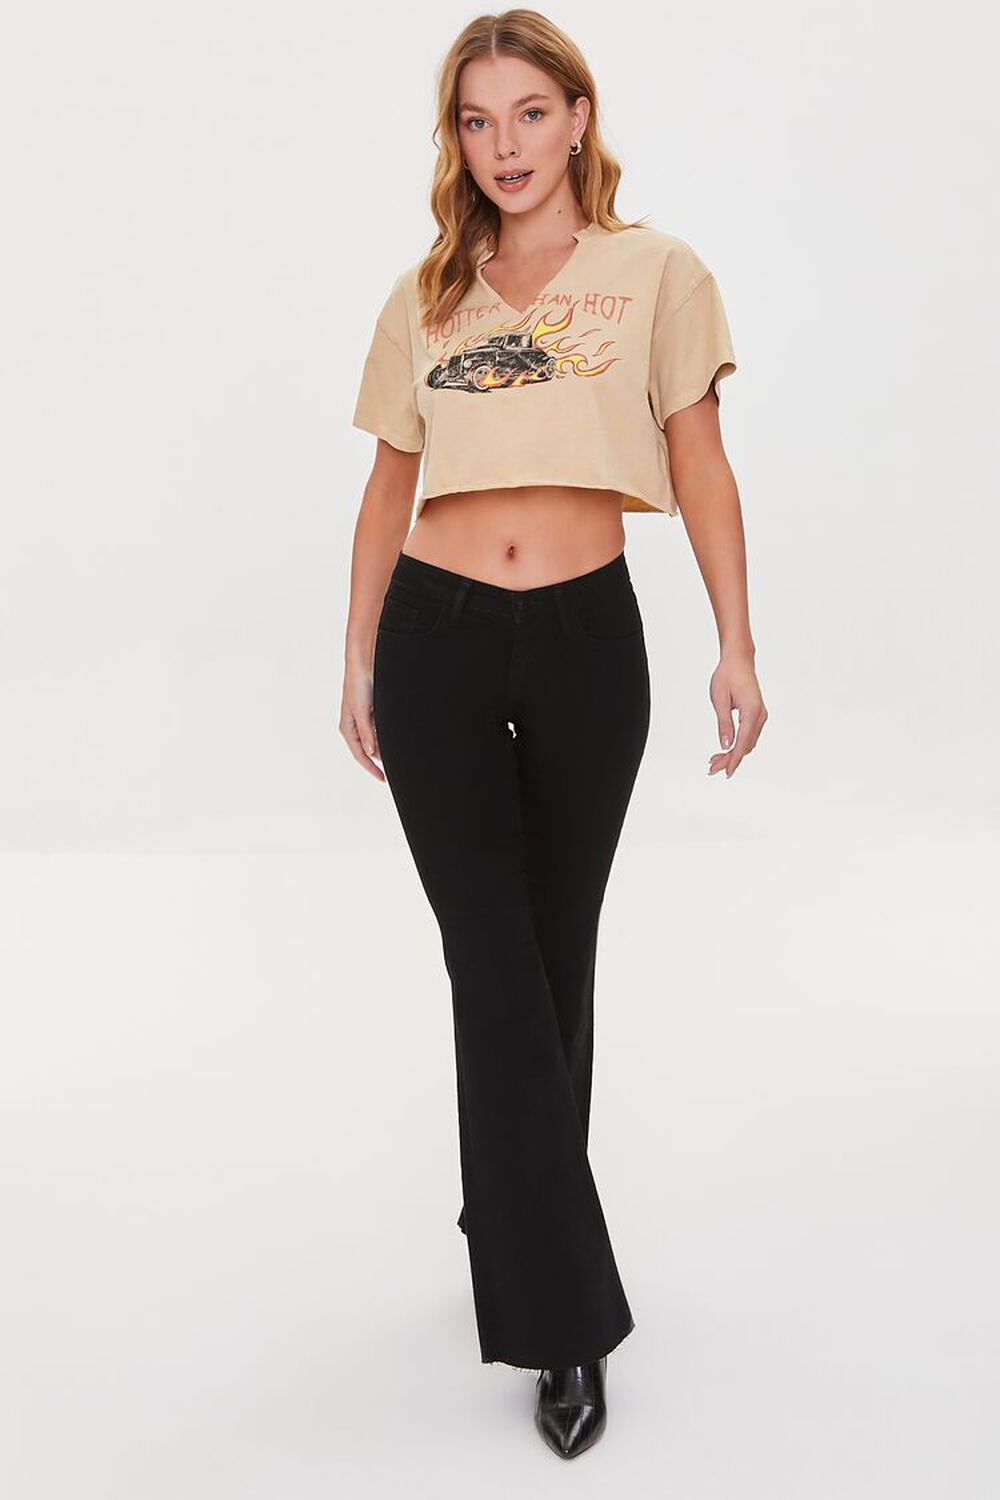 Hotter Than Hot Cropped Tee